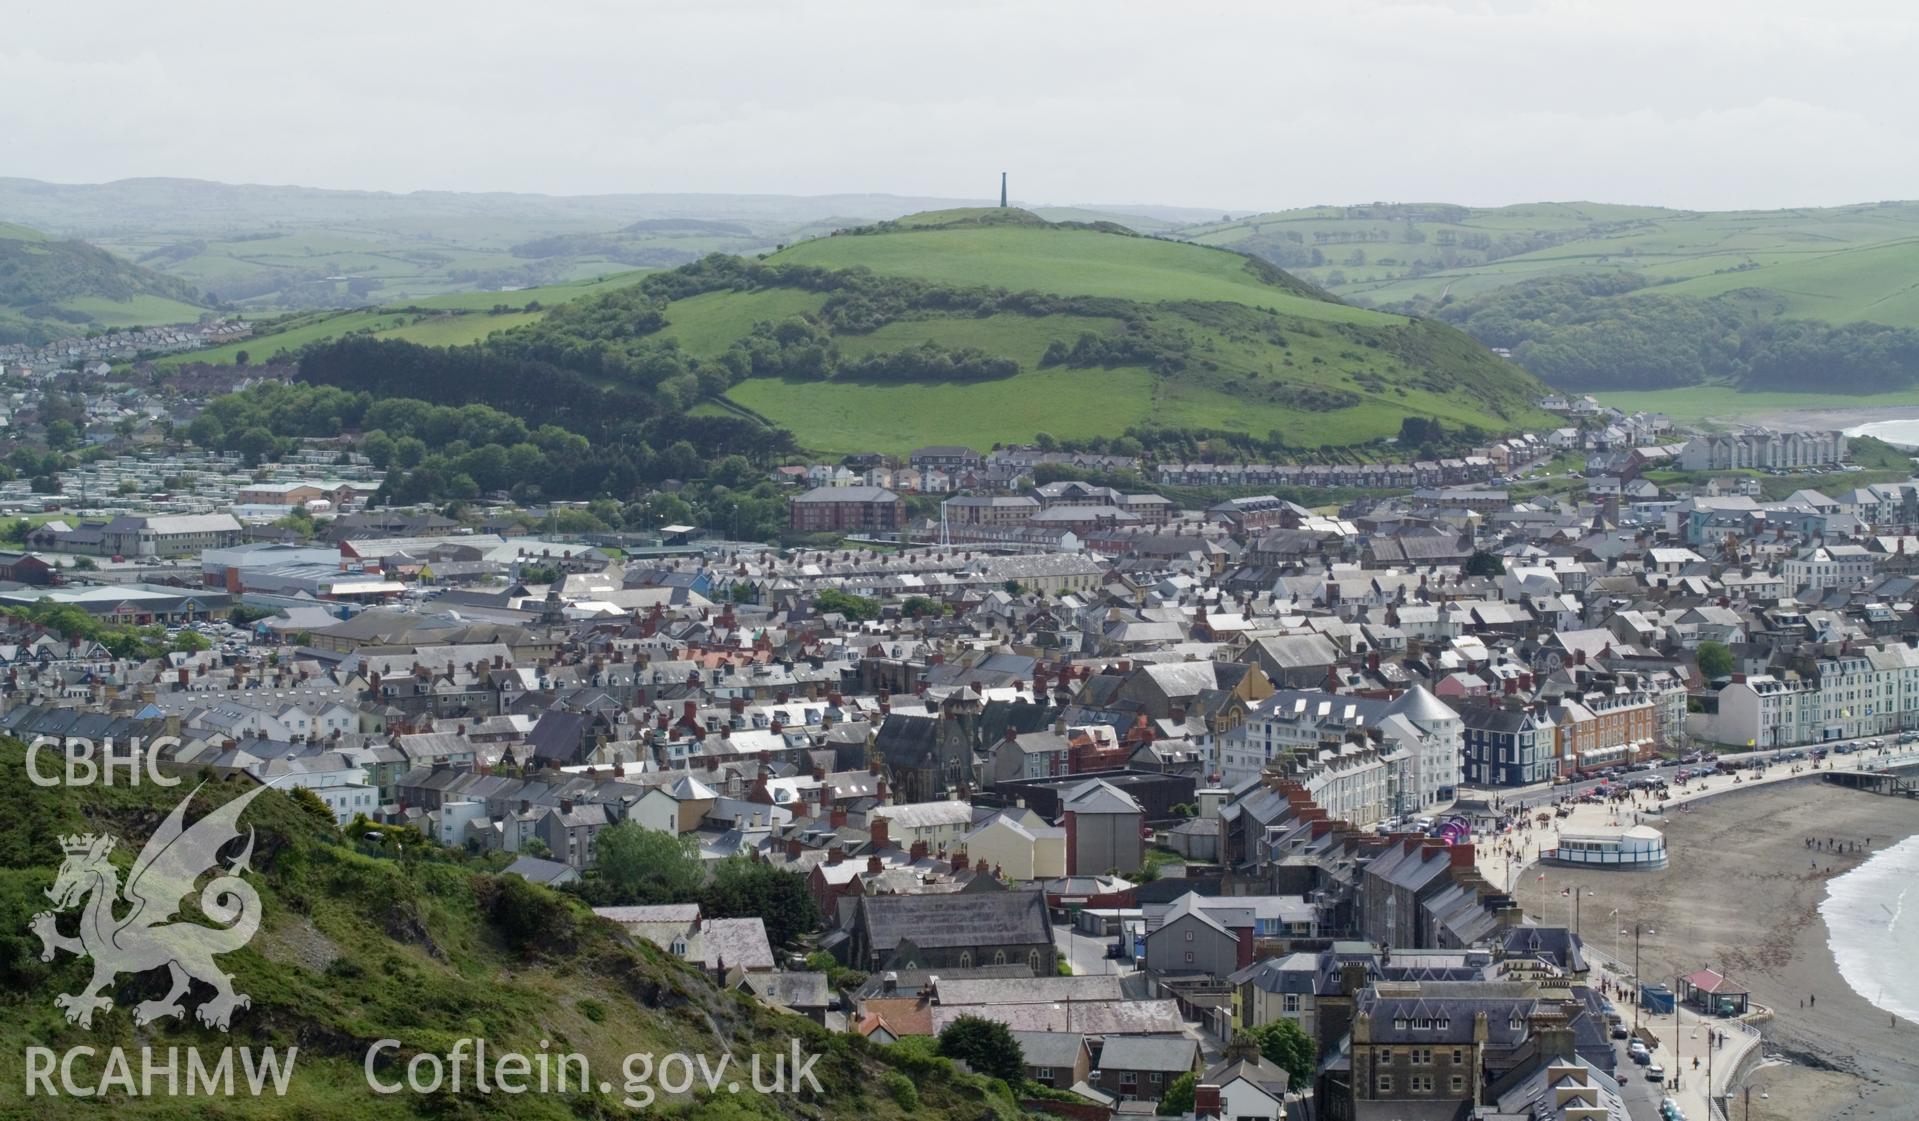 Central Aberystwyth from the north.